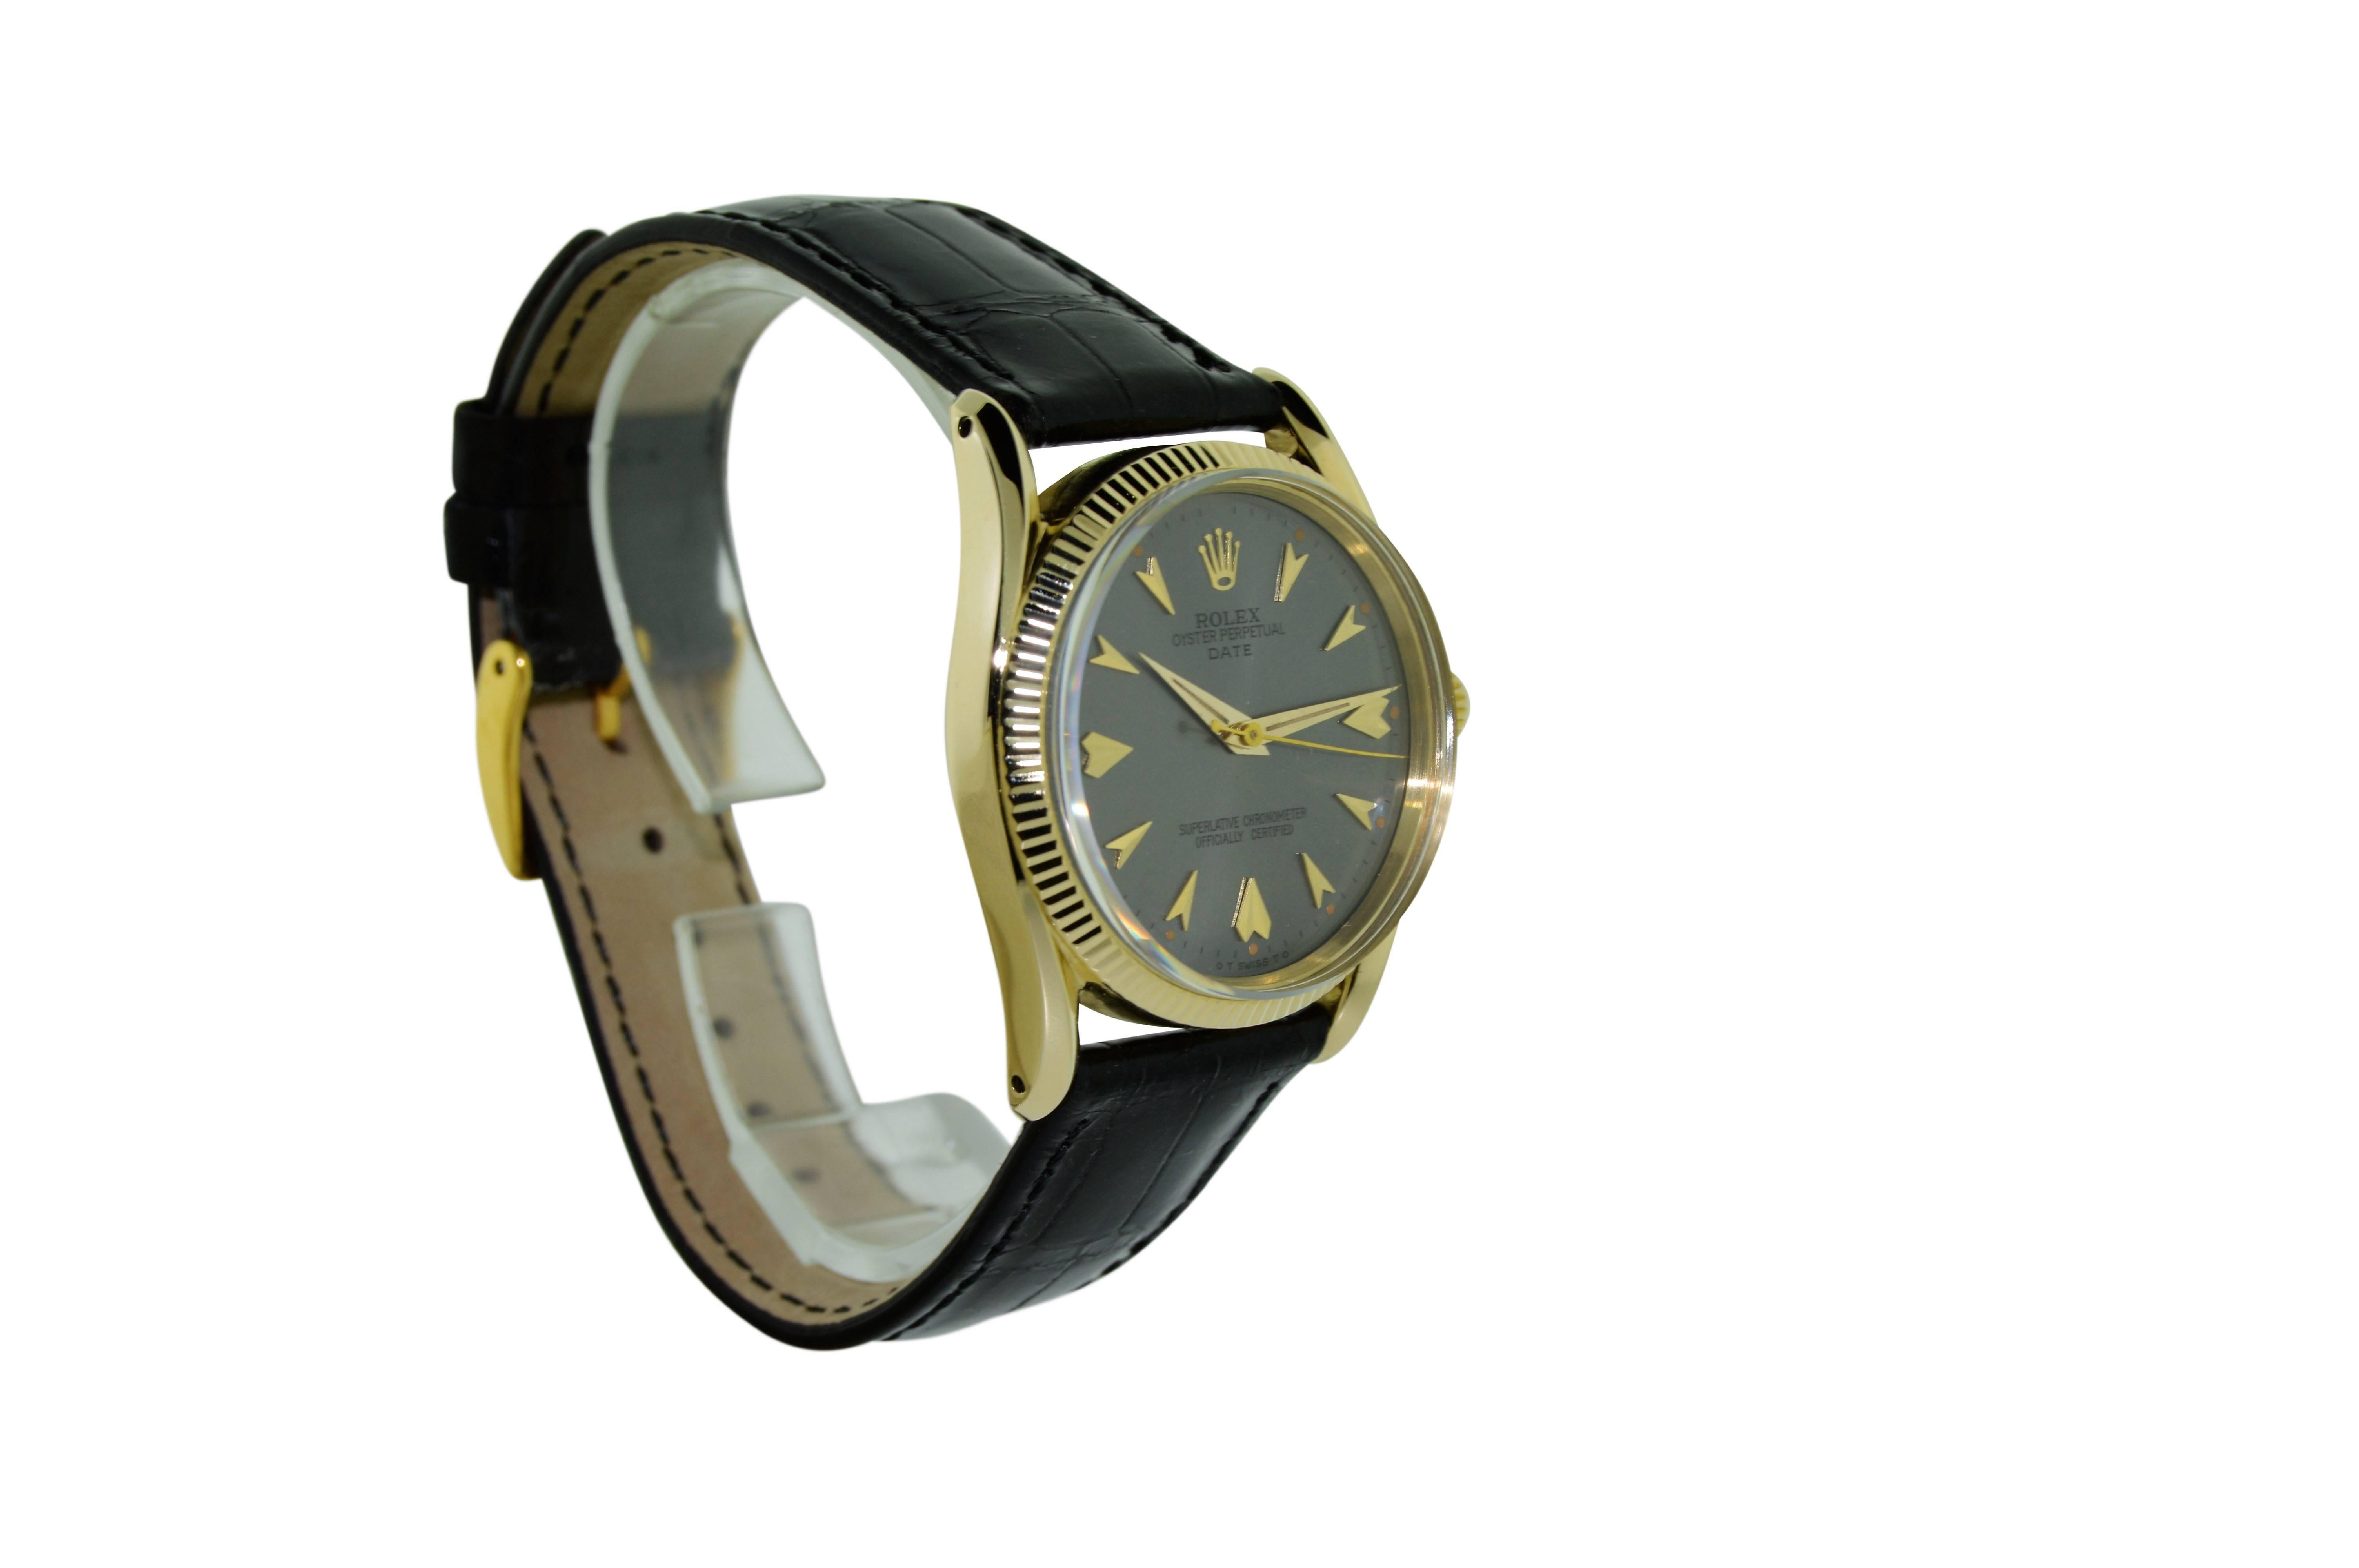 FACTORY / HOUSE: Rolex Watch Company
STYLE / REFERENCE: Oyster Perpetual / Bombe, "Sculpted" Lugs / Ref. 6593
METAL / MATERIAL: 14Kt. Solid Yellow gold
DIMENSIONS:  40mm  X  33mm
CIRCA: 1958
MOVEMENT / CALIBER: 25 Jewels / Perpetual